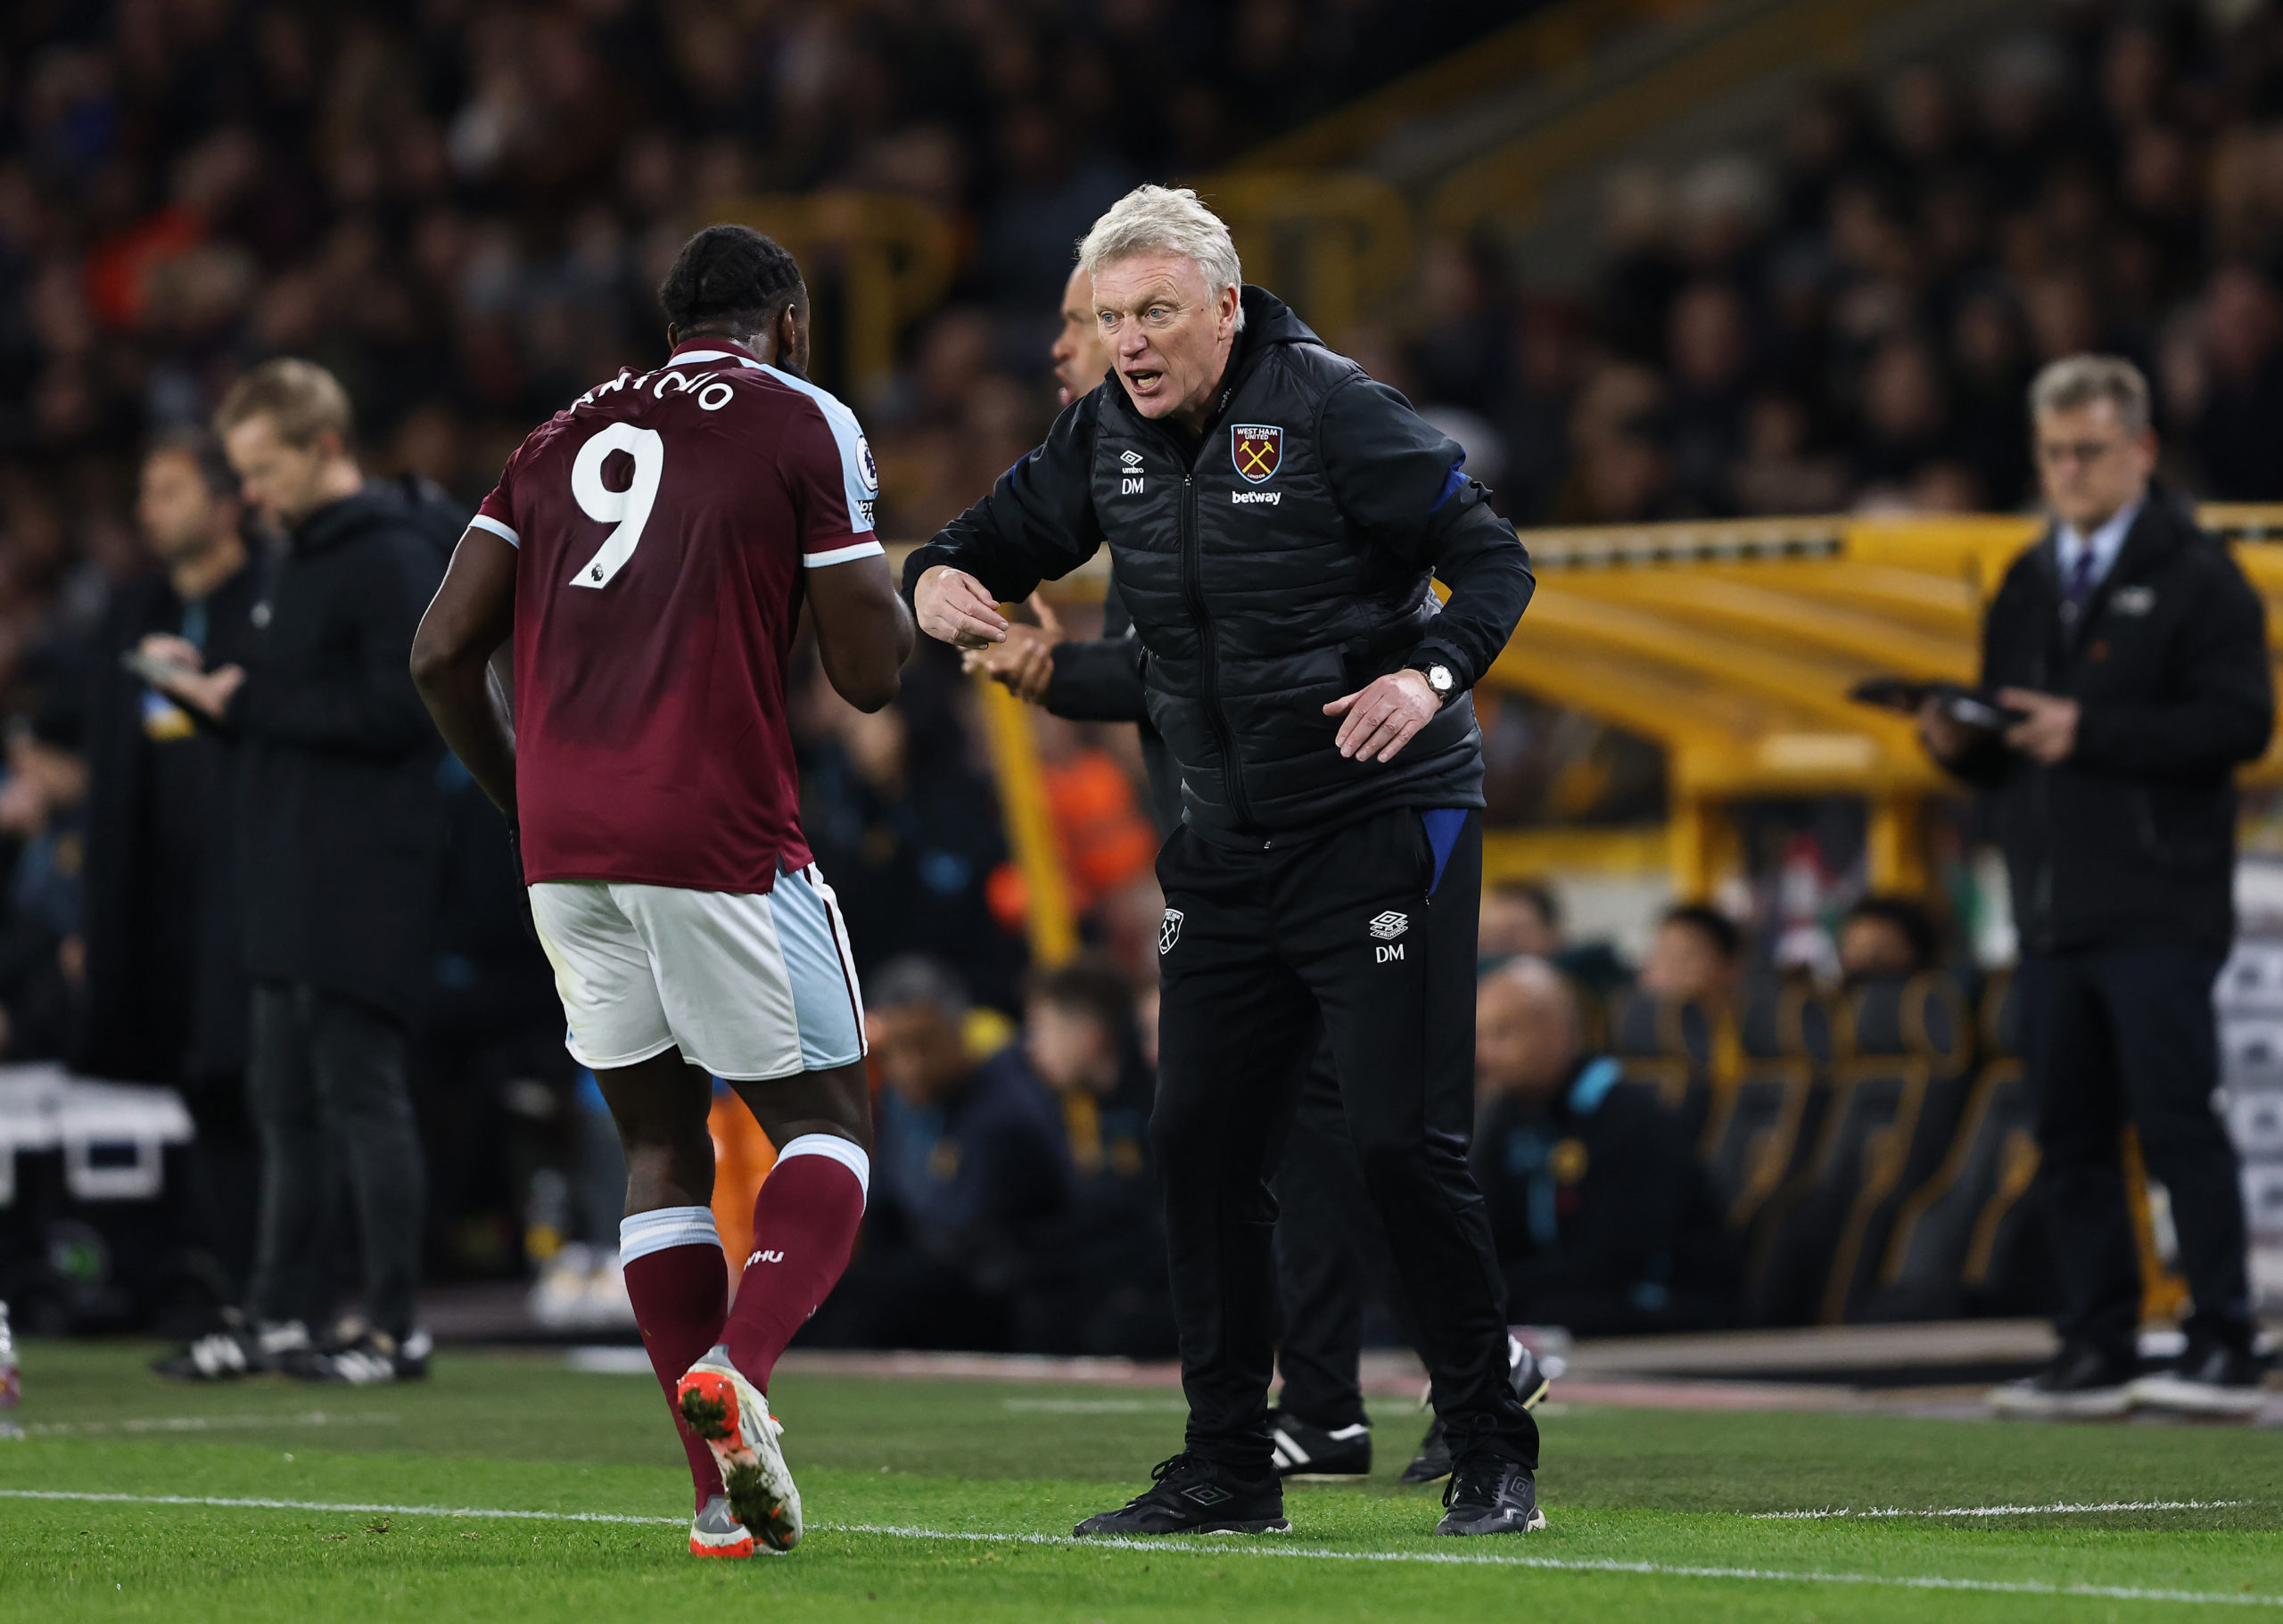 West Ham United manager David Moyes made it very clear what he wanted from Michail Antonio during our FA Cup defeat to Southampton